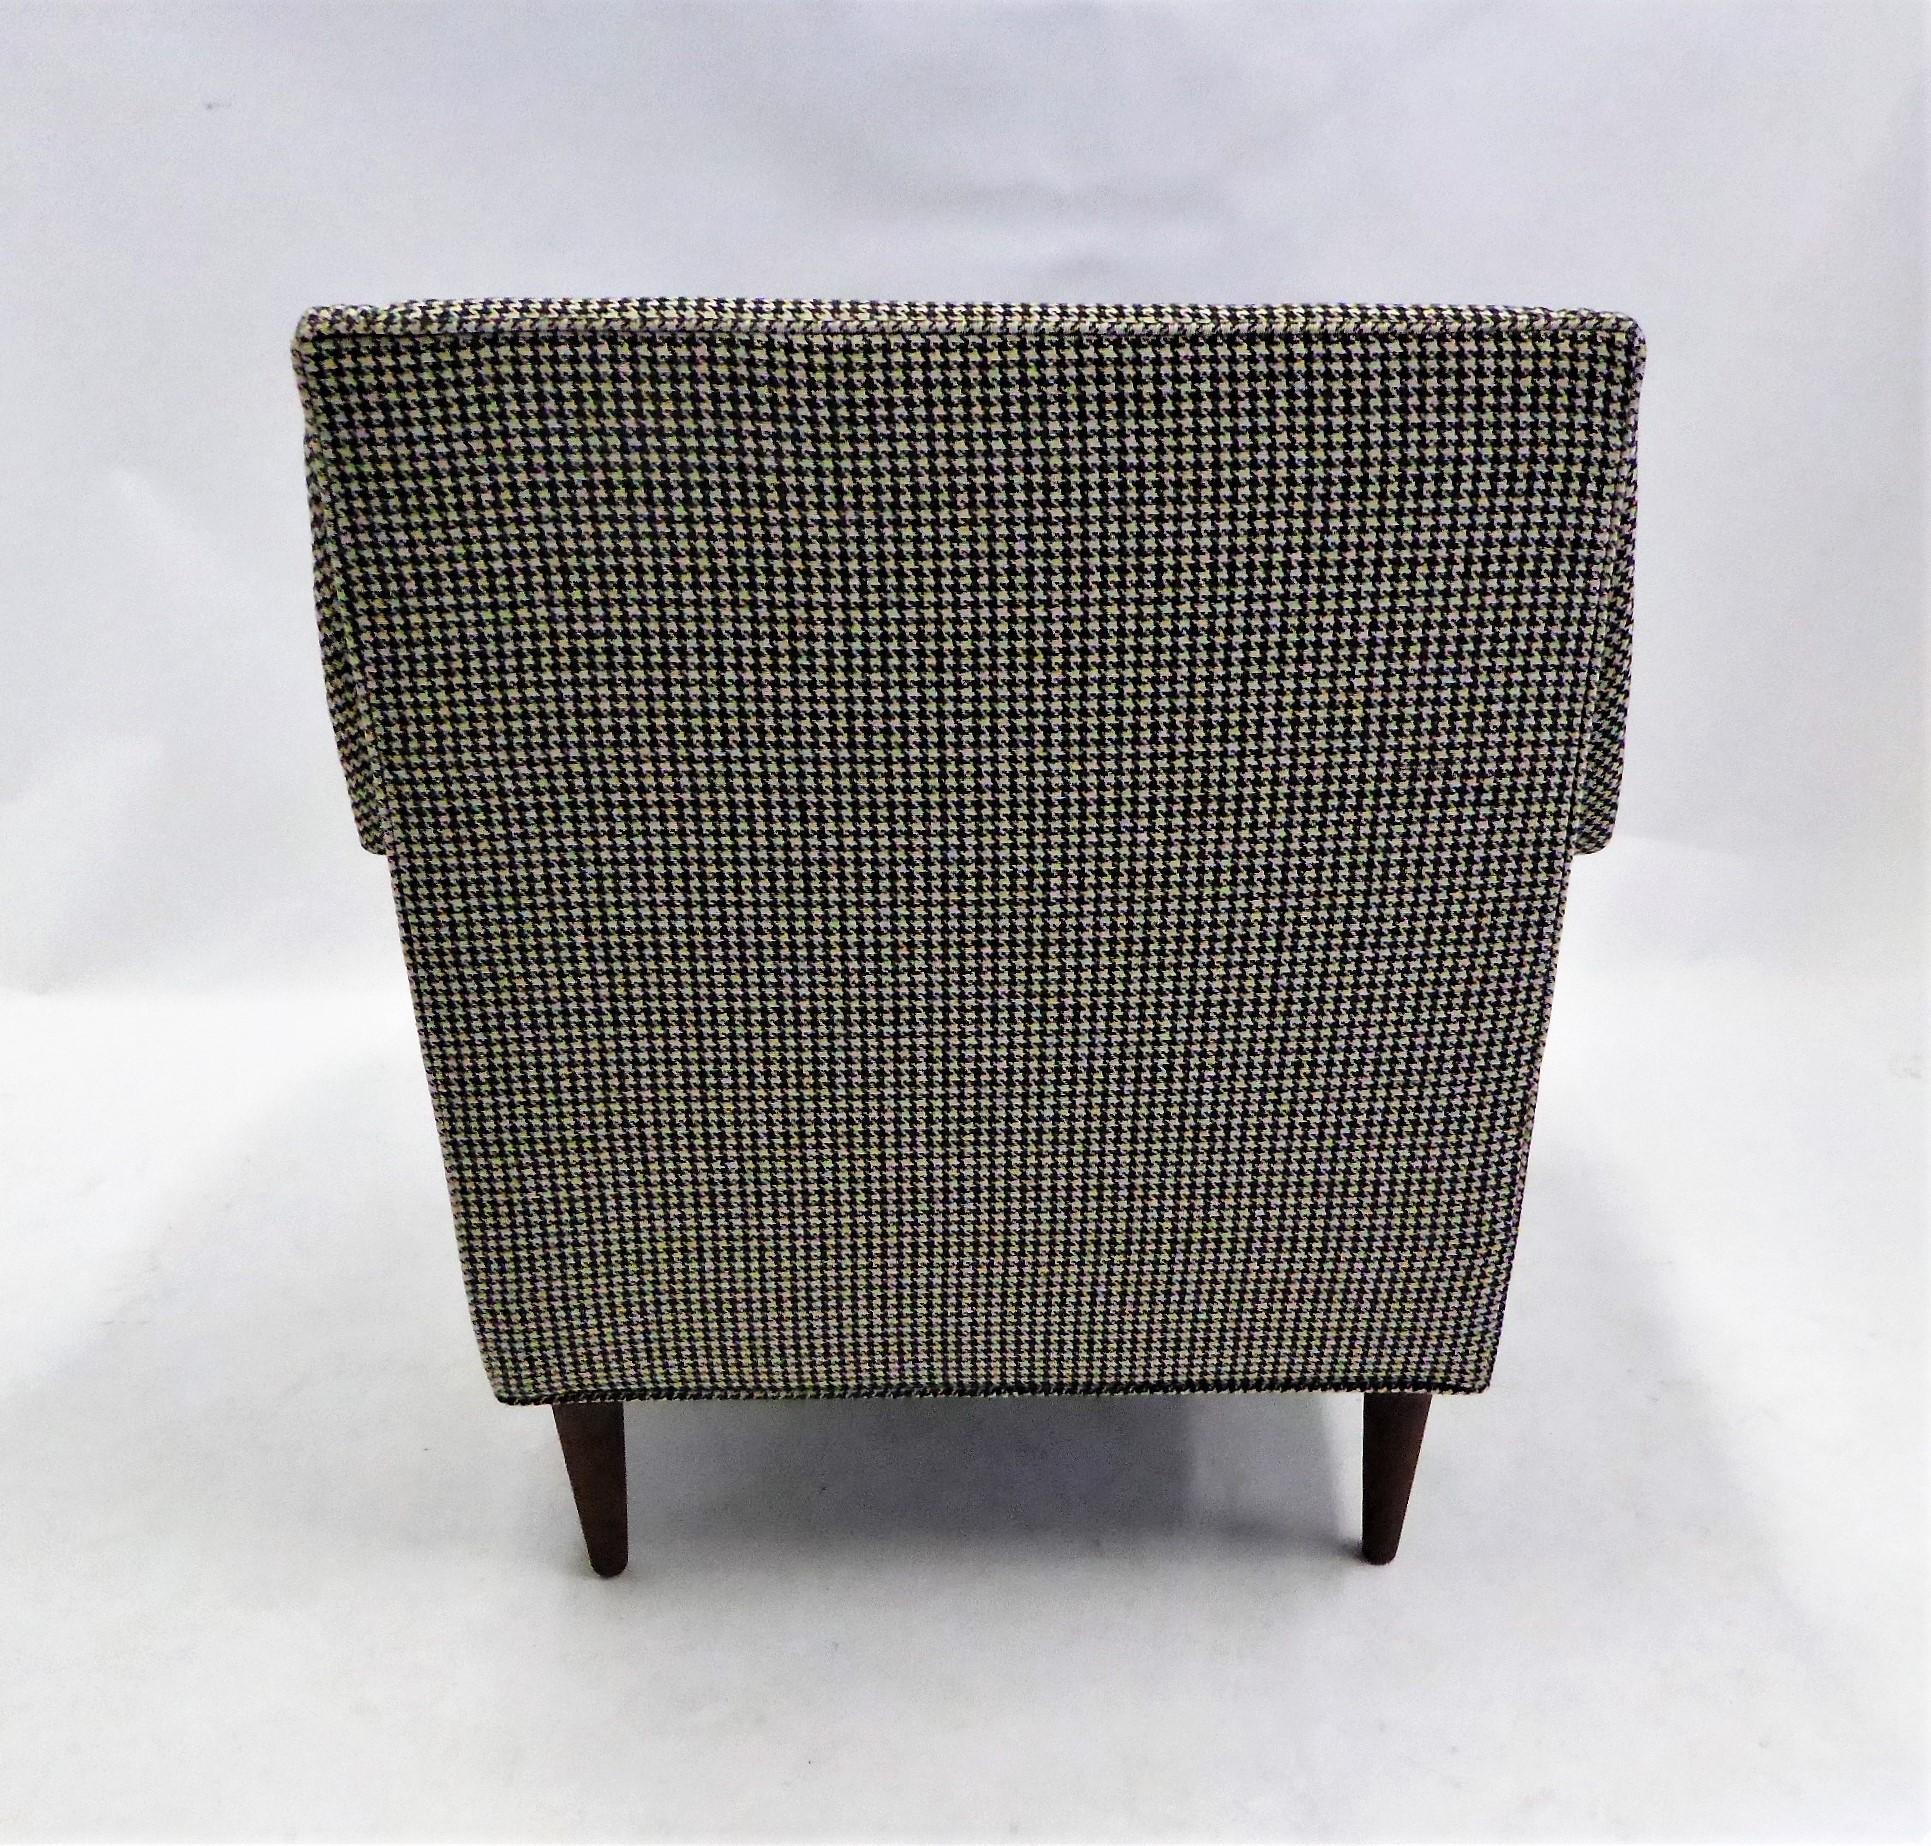 American 1950s Italian Inspired Lounge Chair in Black and White Houndstooth Fabric